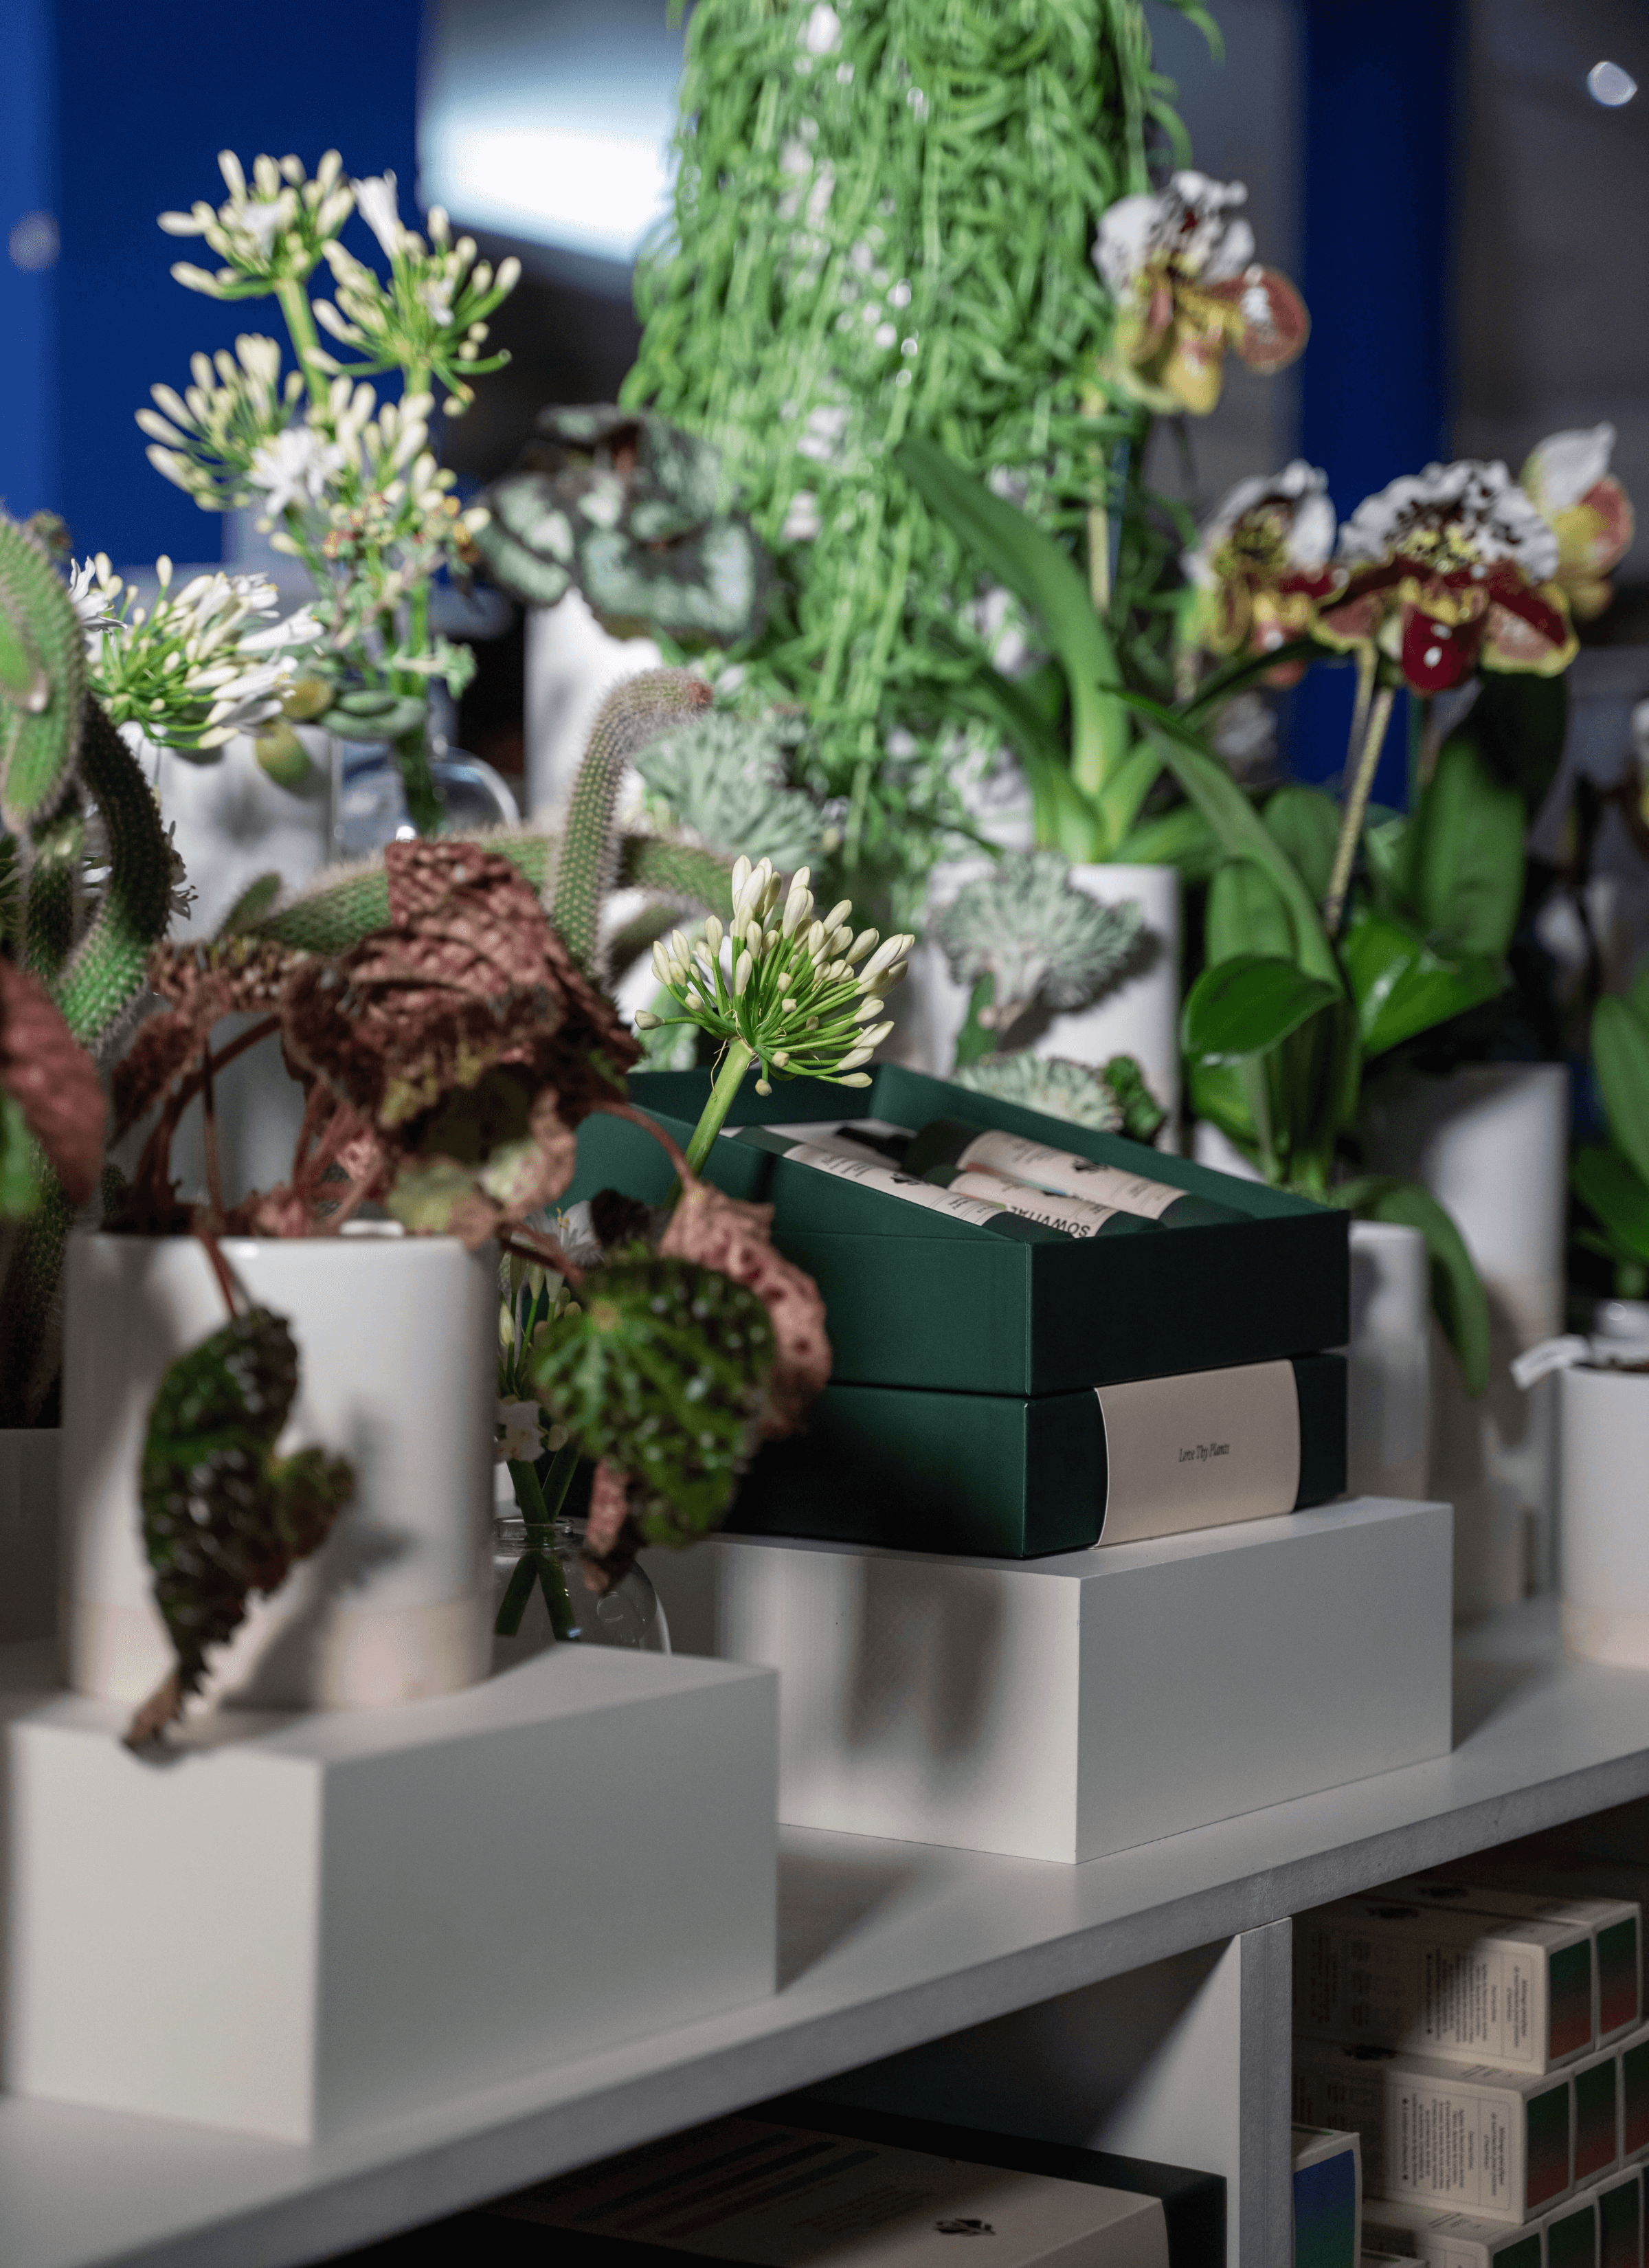 Sowvital's three-step gift set is prominently displayed on the surface, arranged with care and attention to detail. The gift set is surrounded by a lush assortment of plants and flowers, enhancing its natural appeal. Underneath the surface, stocks are neatly stored in the drawer, ensuring ample supply for customers.